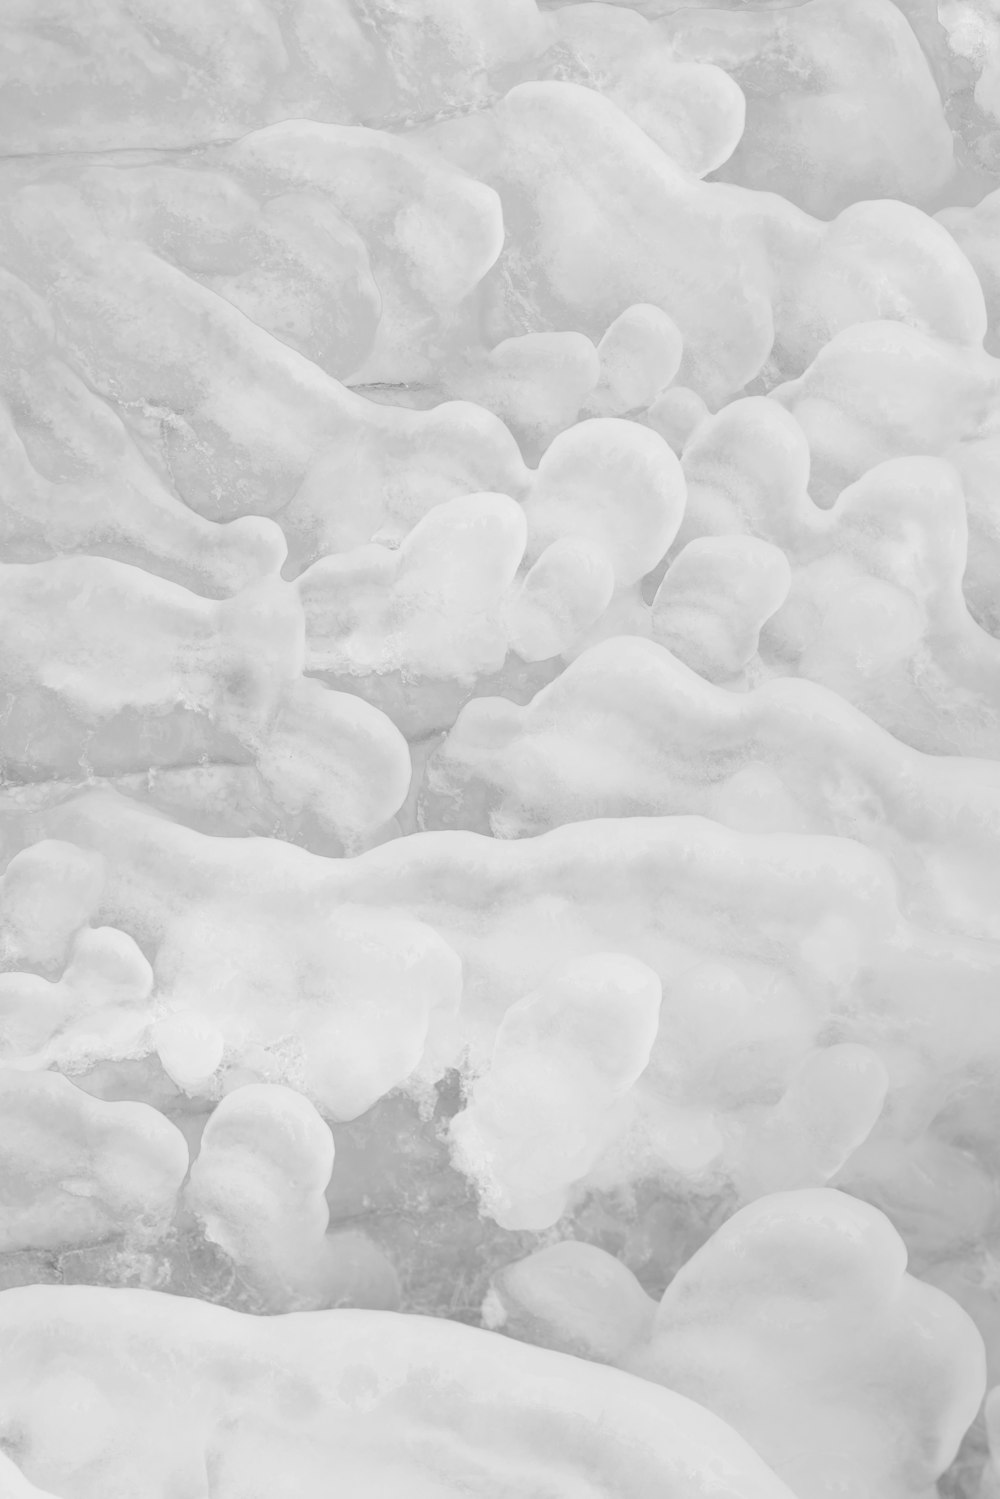 a black and white photo of snow covered rocks